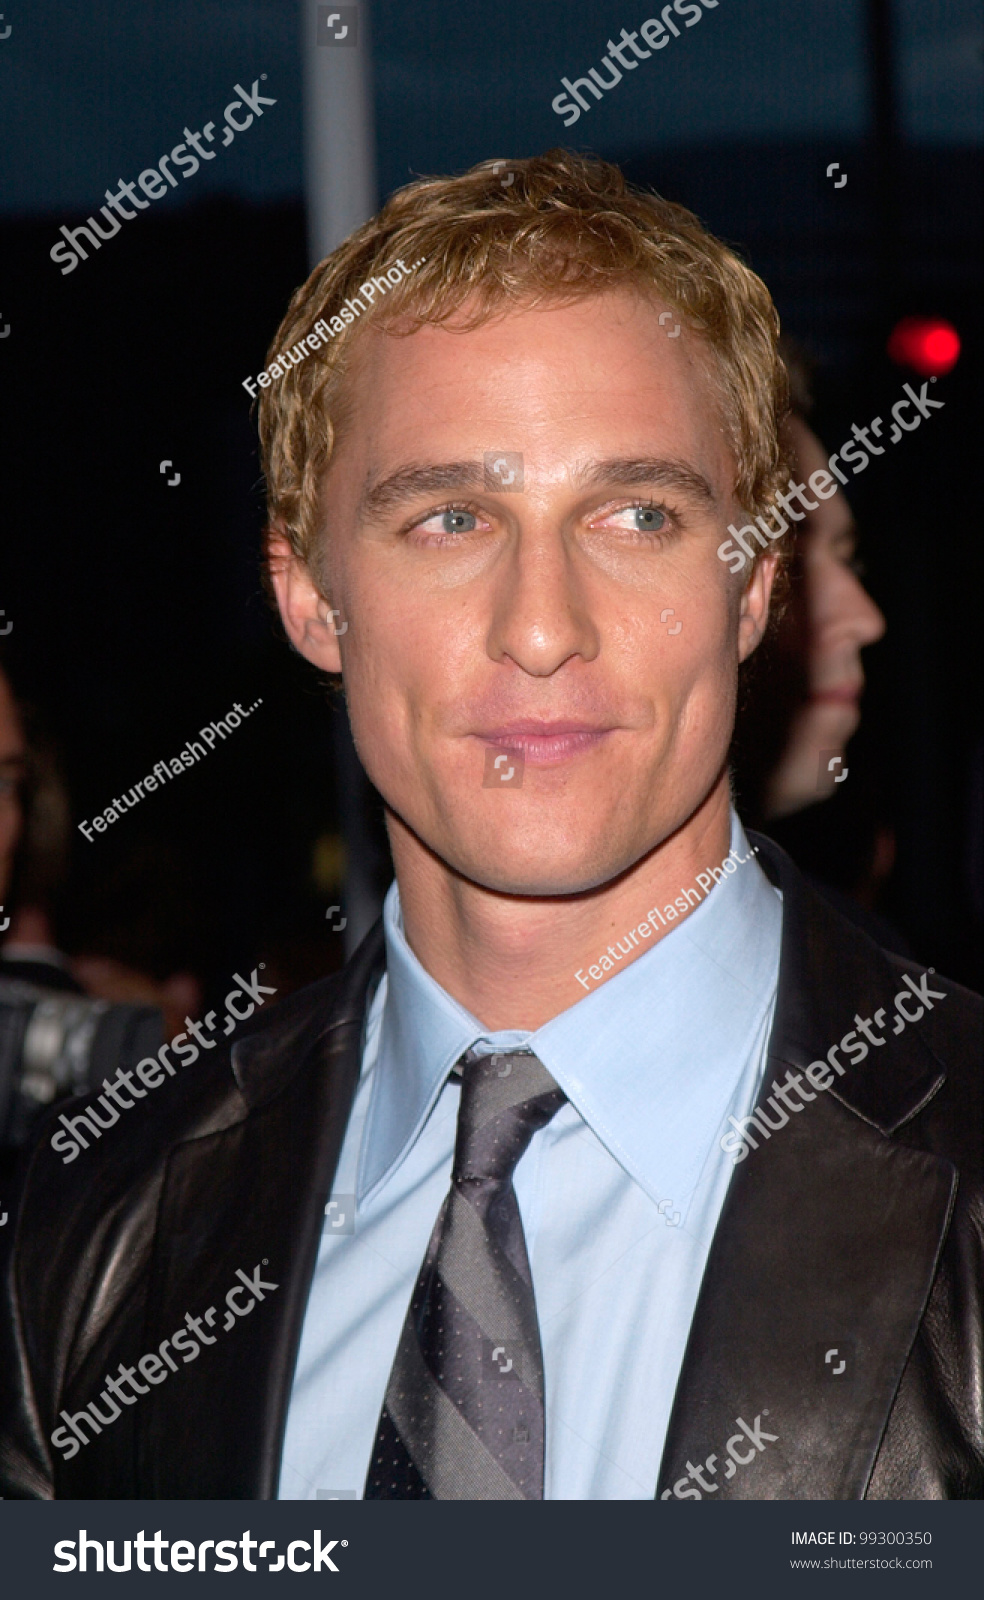 stock-photo--apr-actor-matthew-mcconaughey-at-the-world-premiere-in-los-angeles-of-his-new-movie-u-99300350.jpg